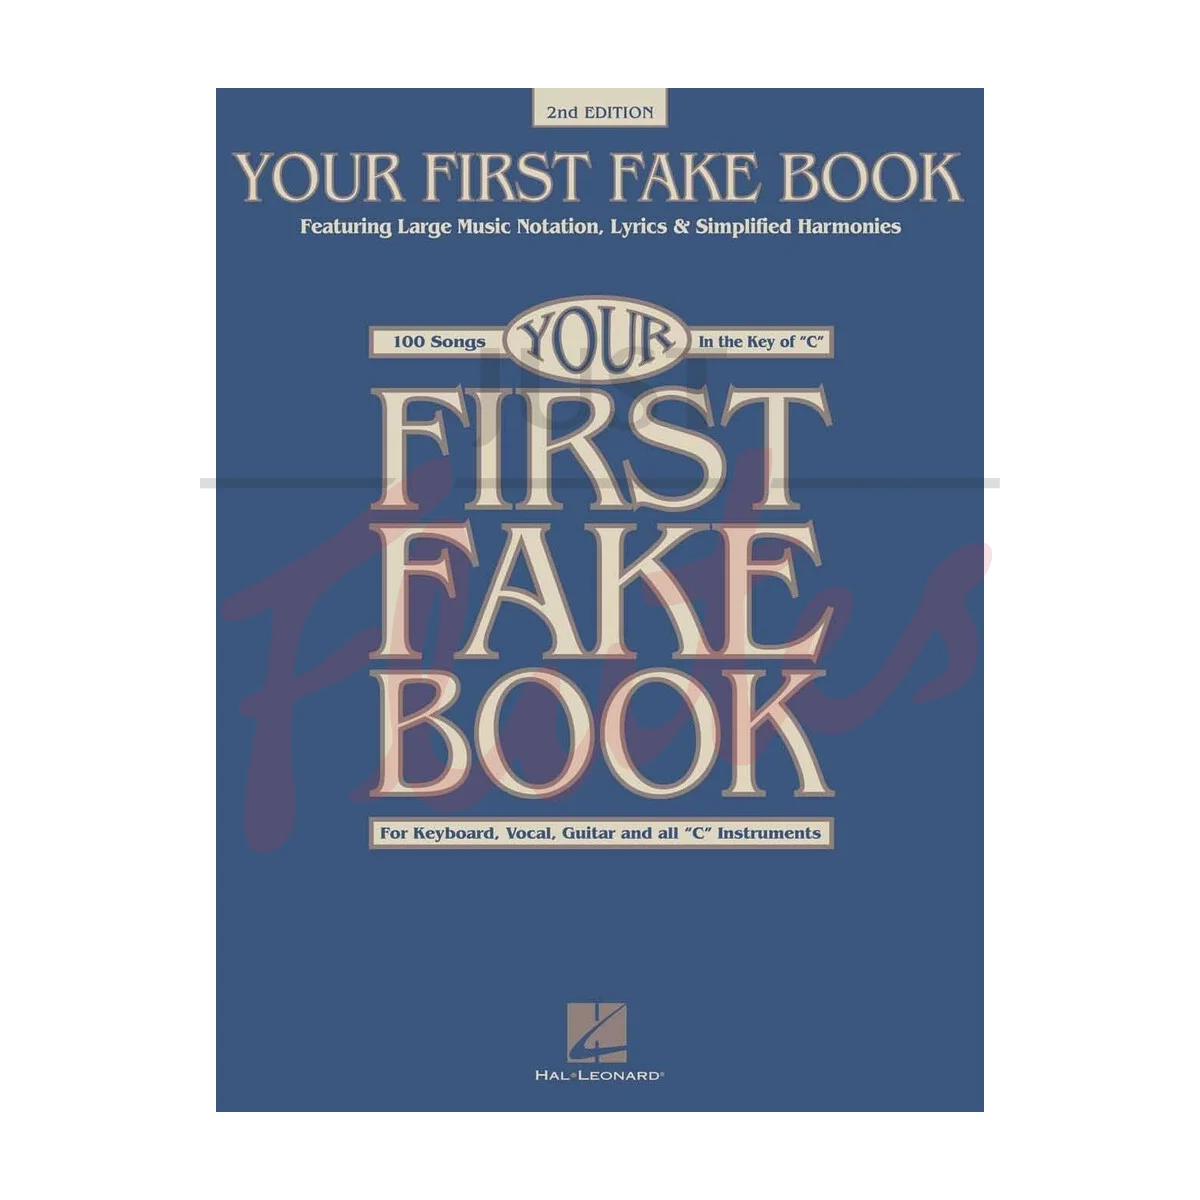 Your First Fake Book for Keyboard, Vocal, Guitar and all C Instruments